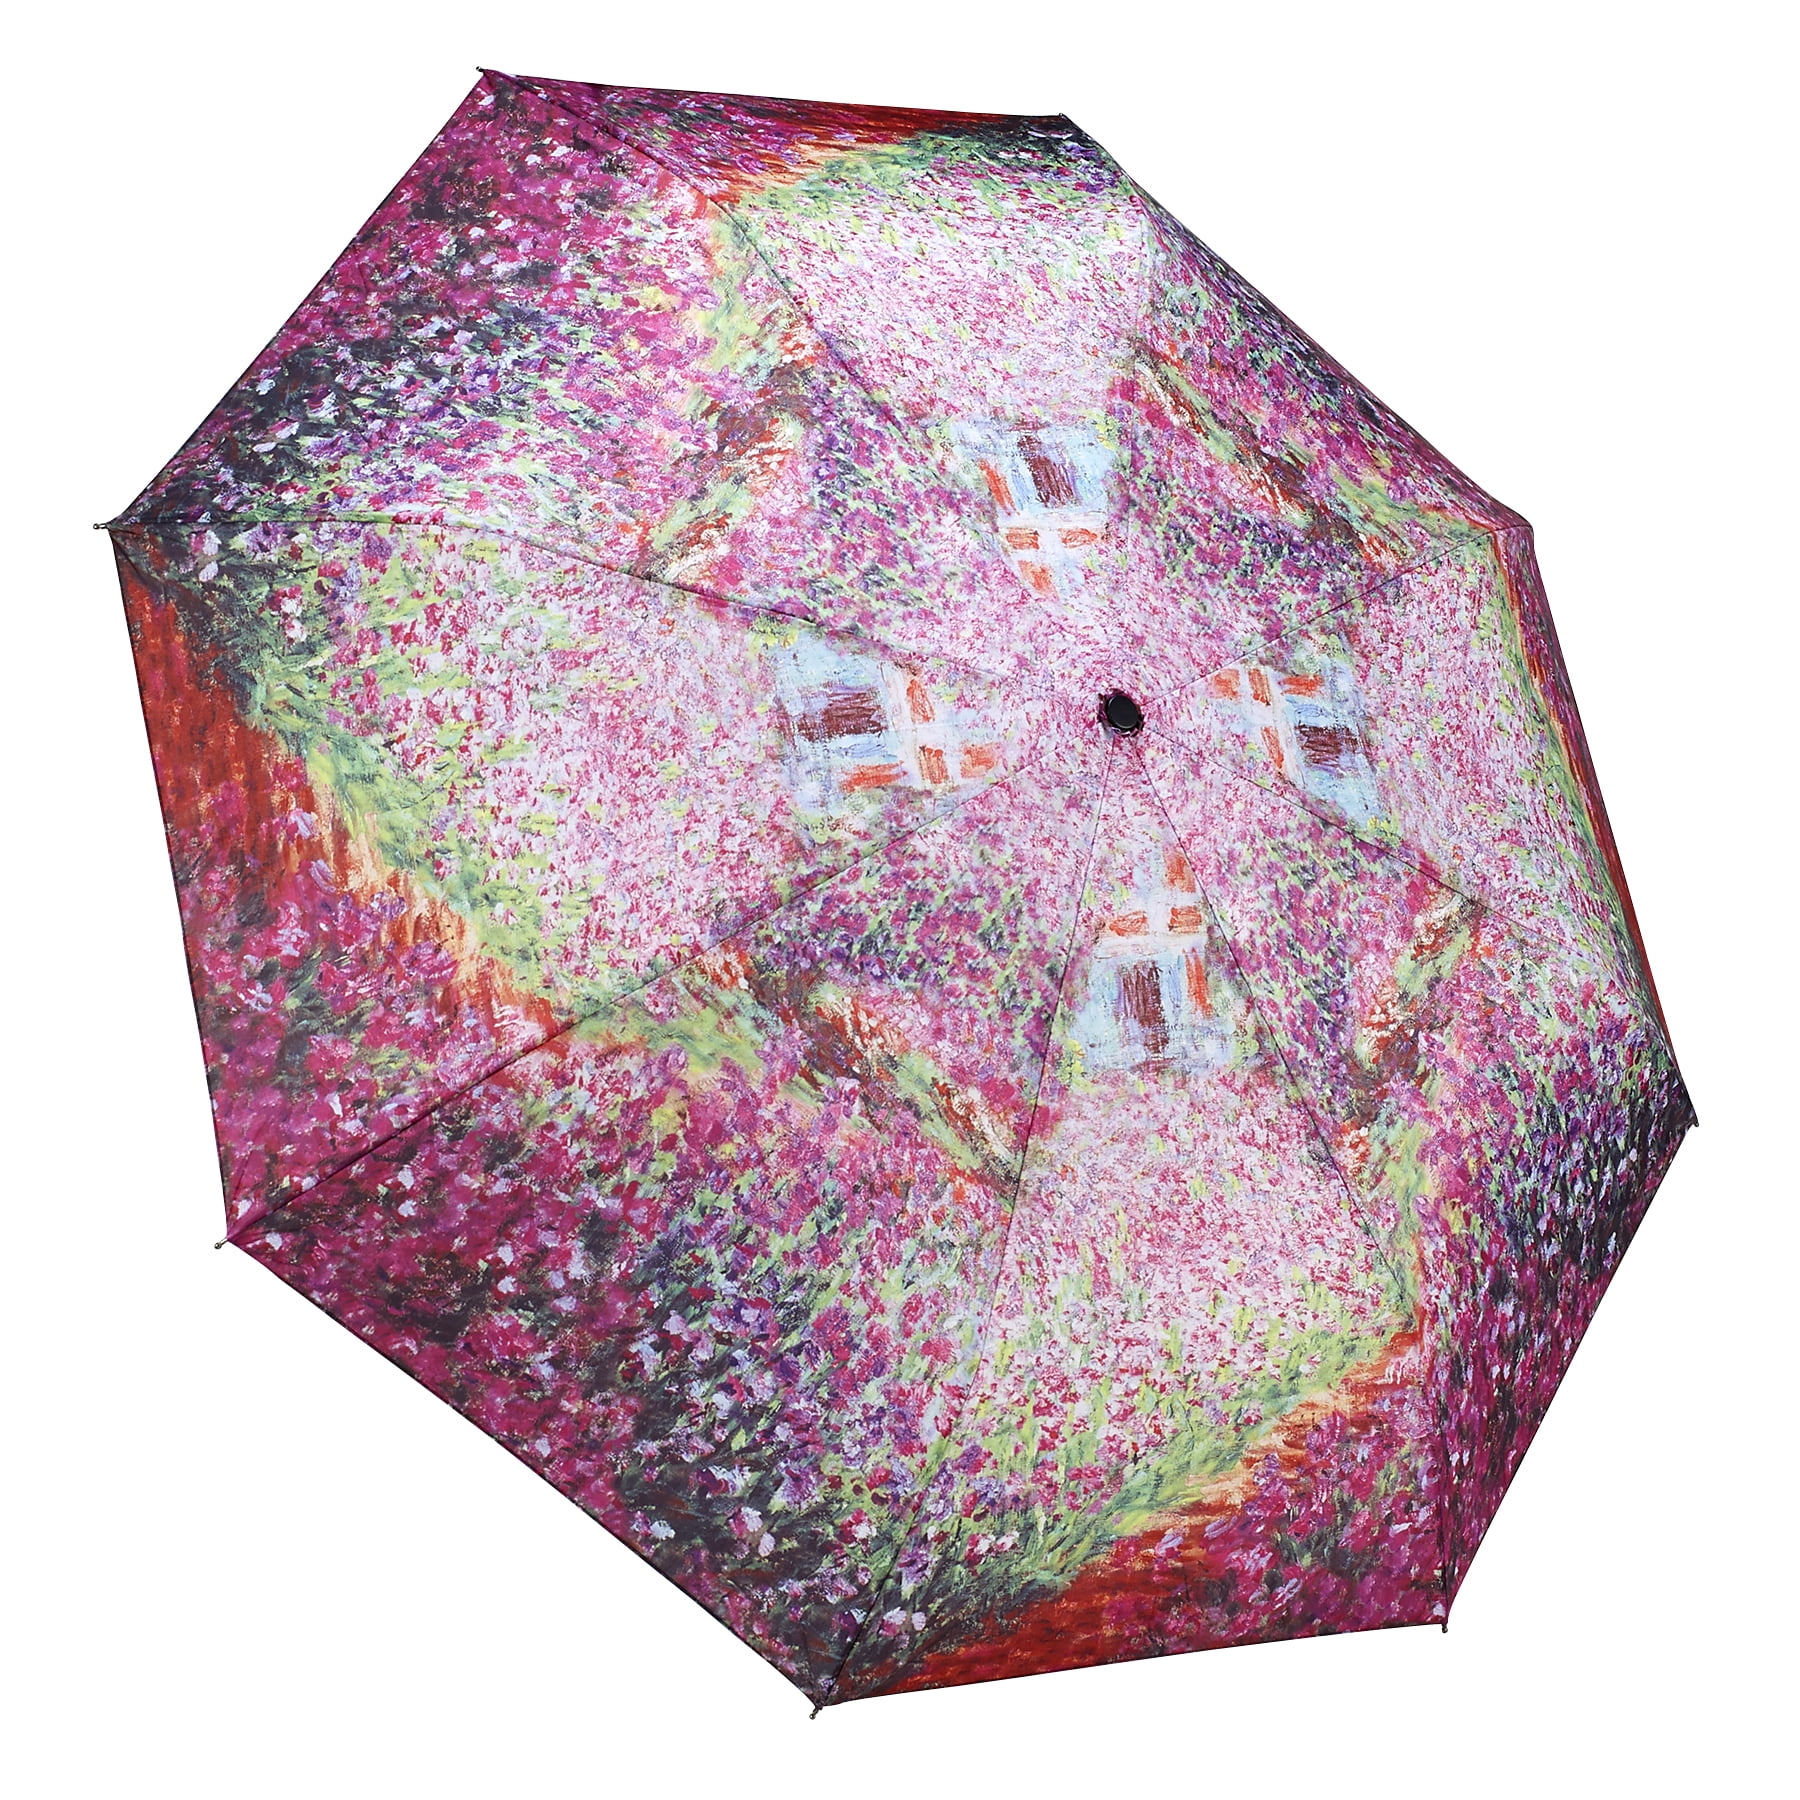 Galleria Stained Glass Dragonfly Folding Umbrella 